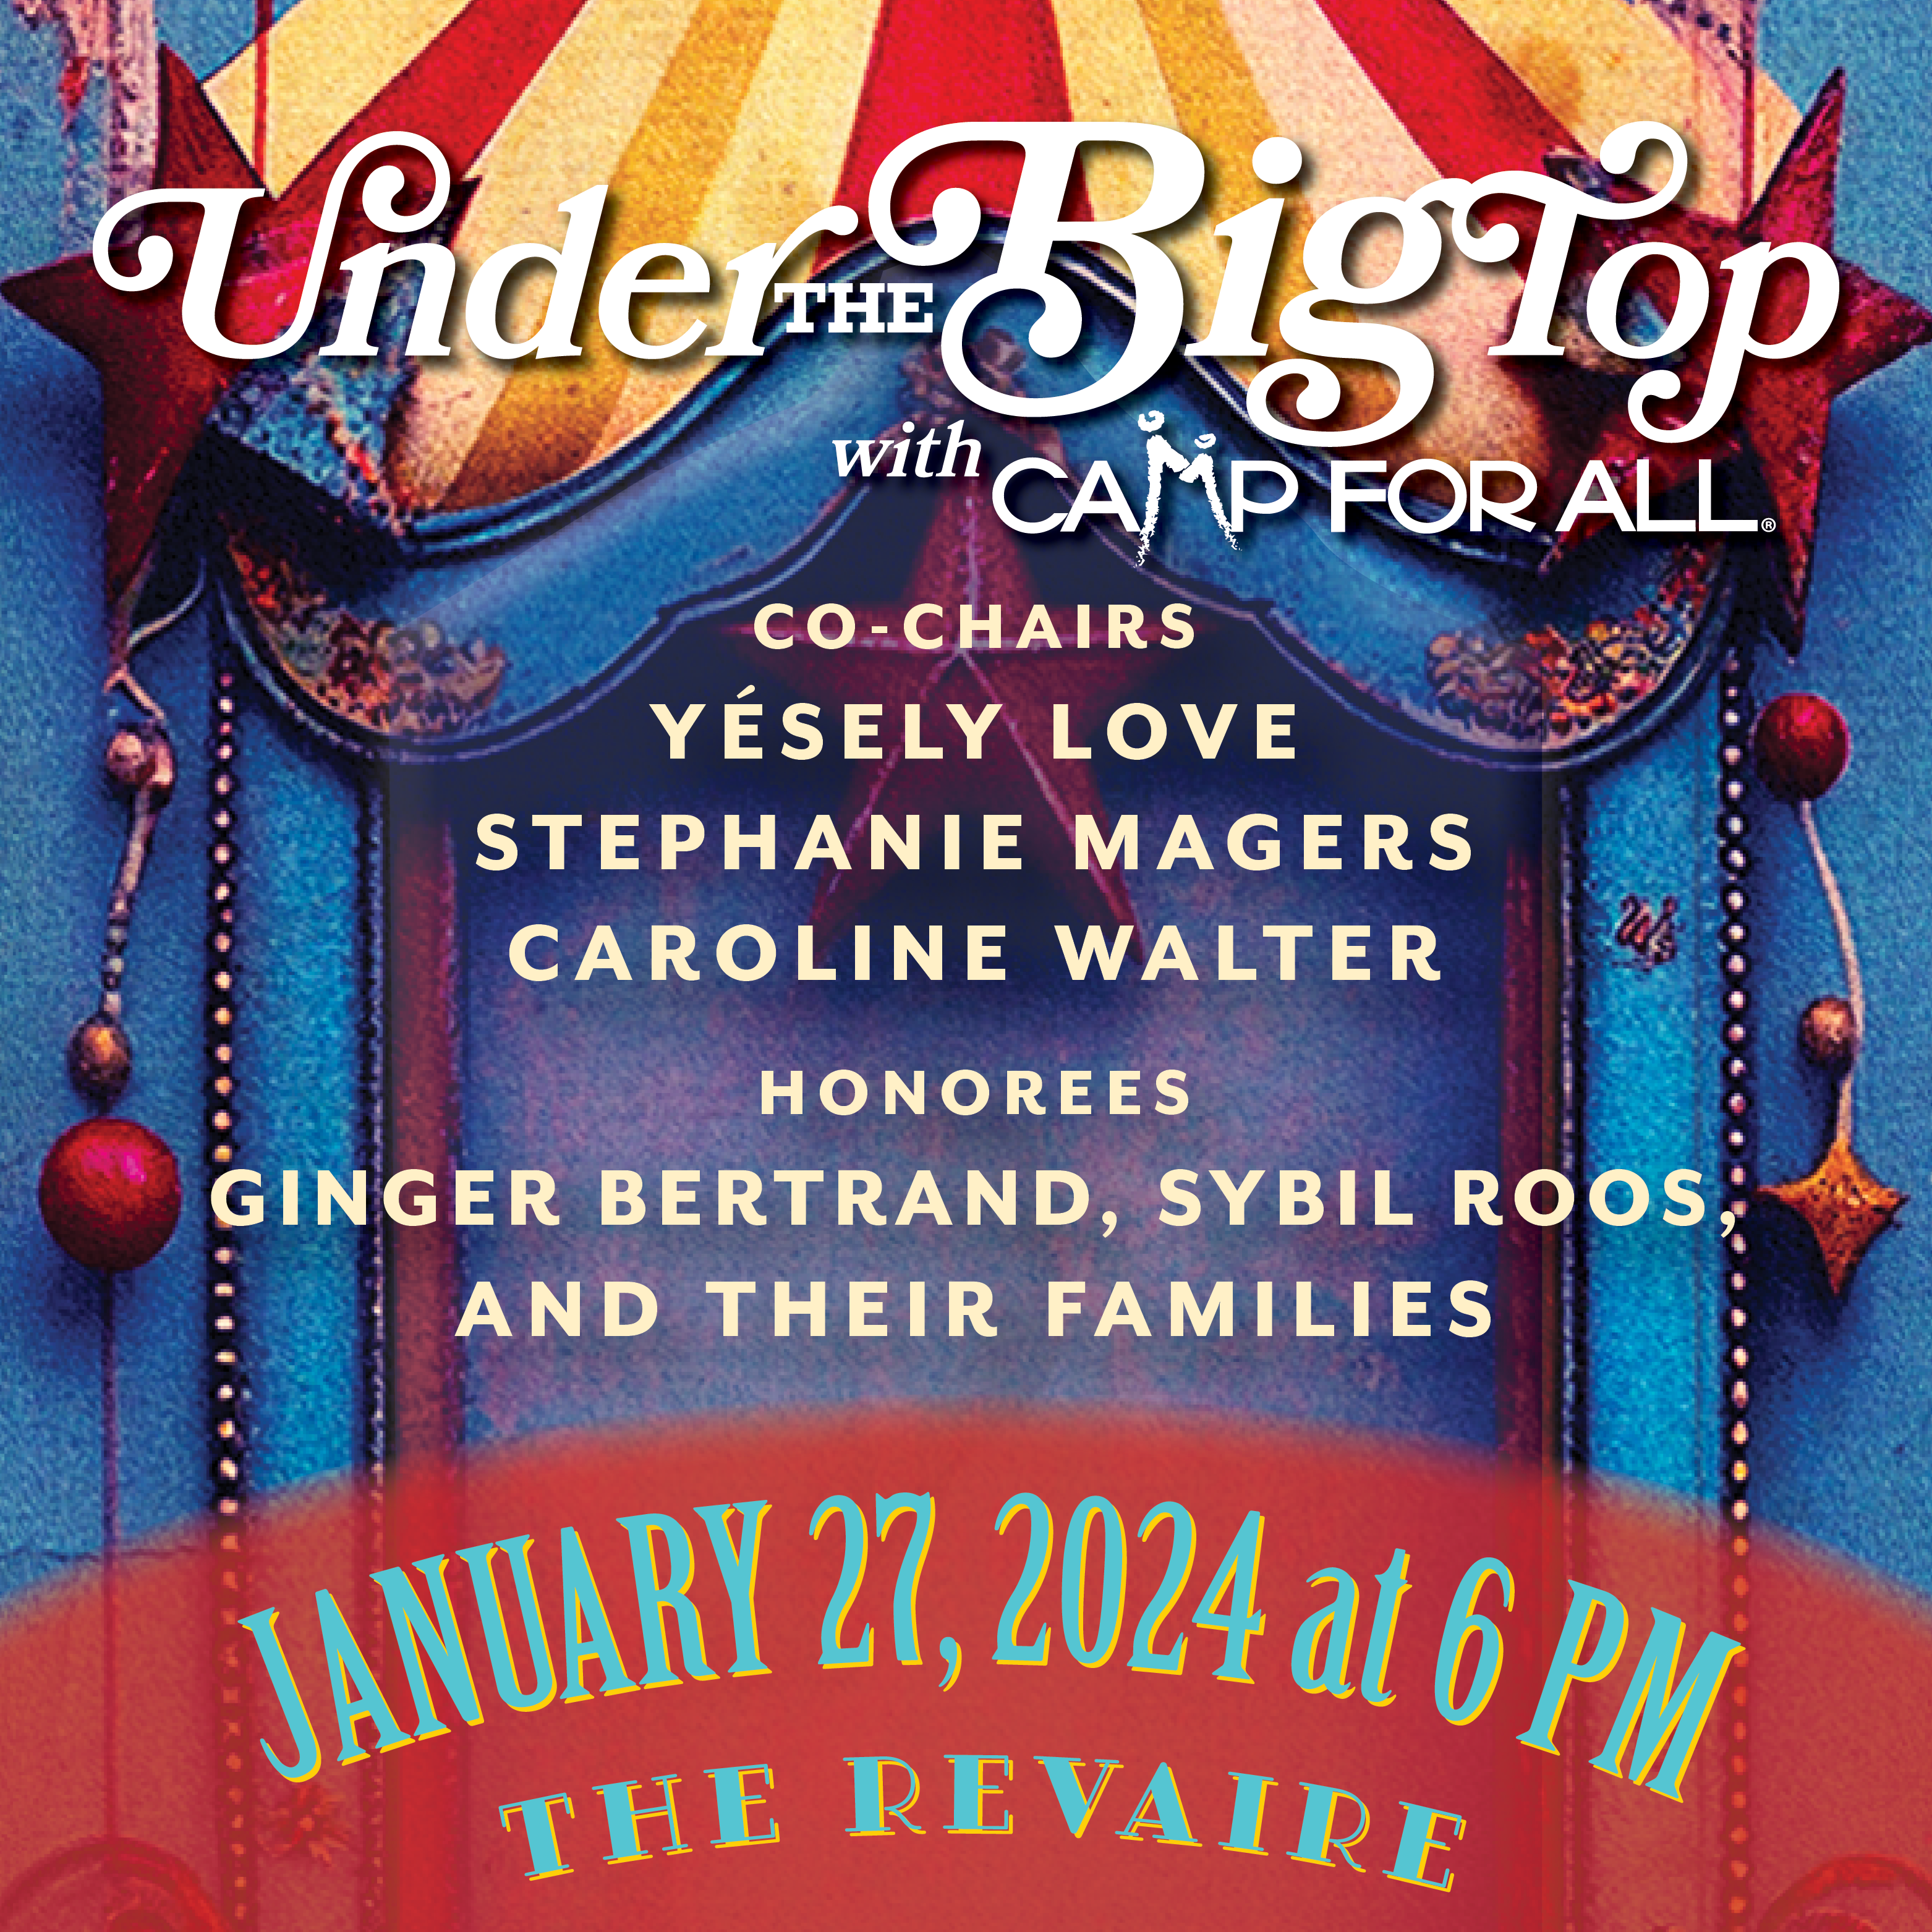 Colorful image in primary colors of a circus tent, with text overlay promoting the Camp For All Gala, taking place at The Revaire on January 27, 2024.